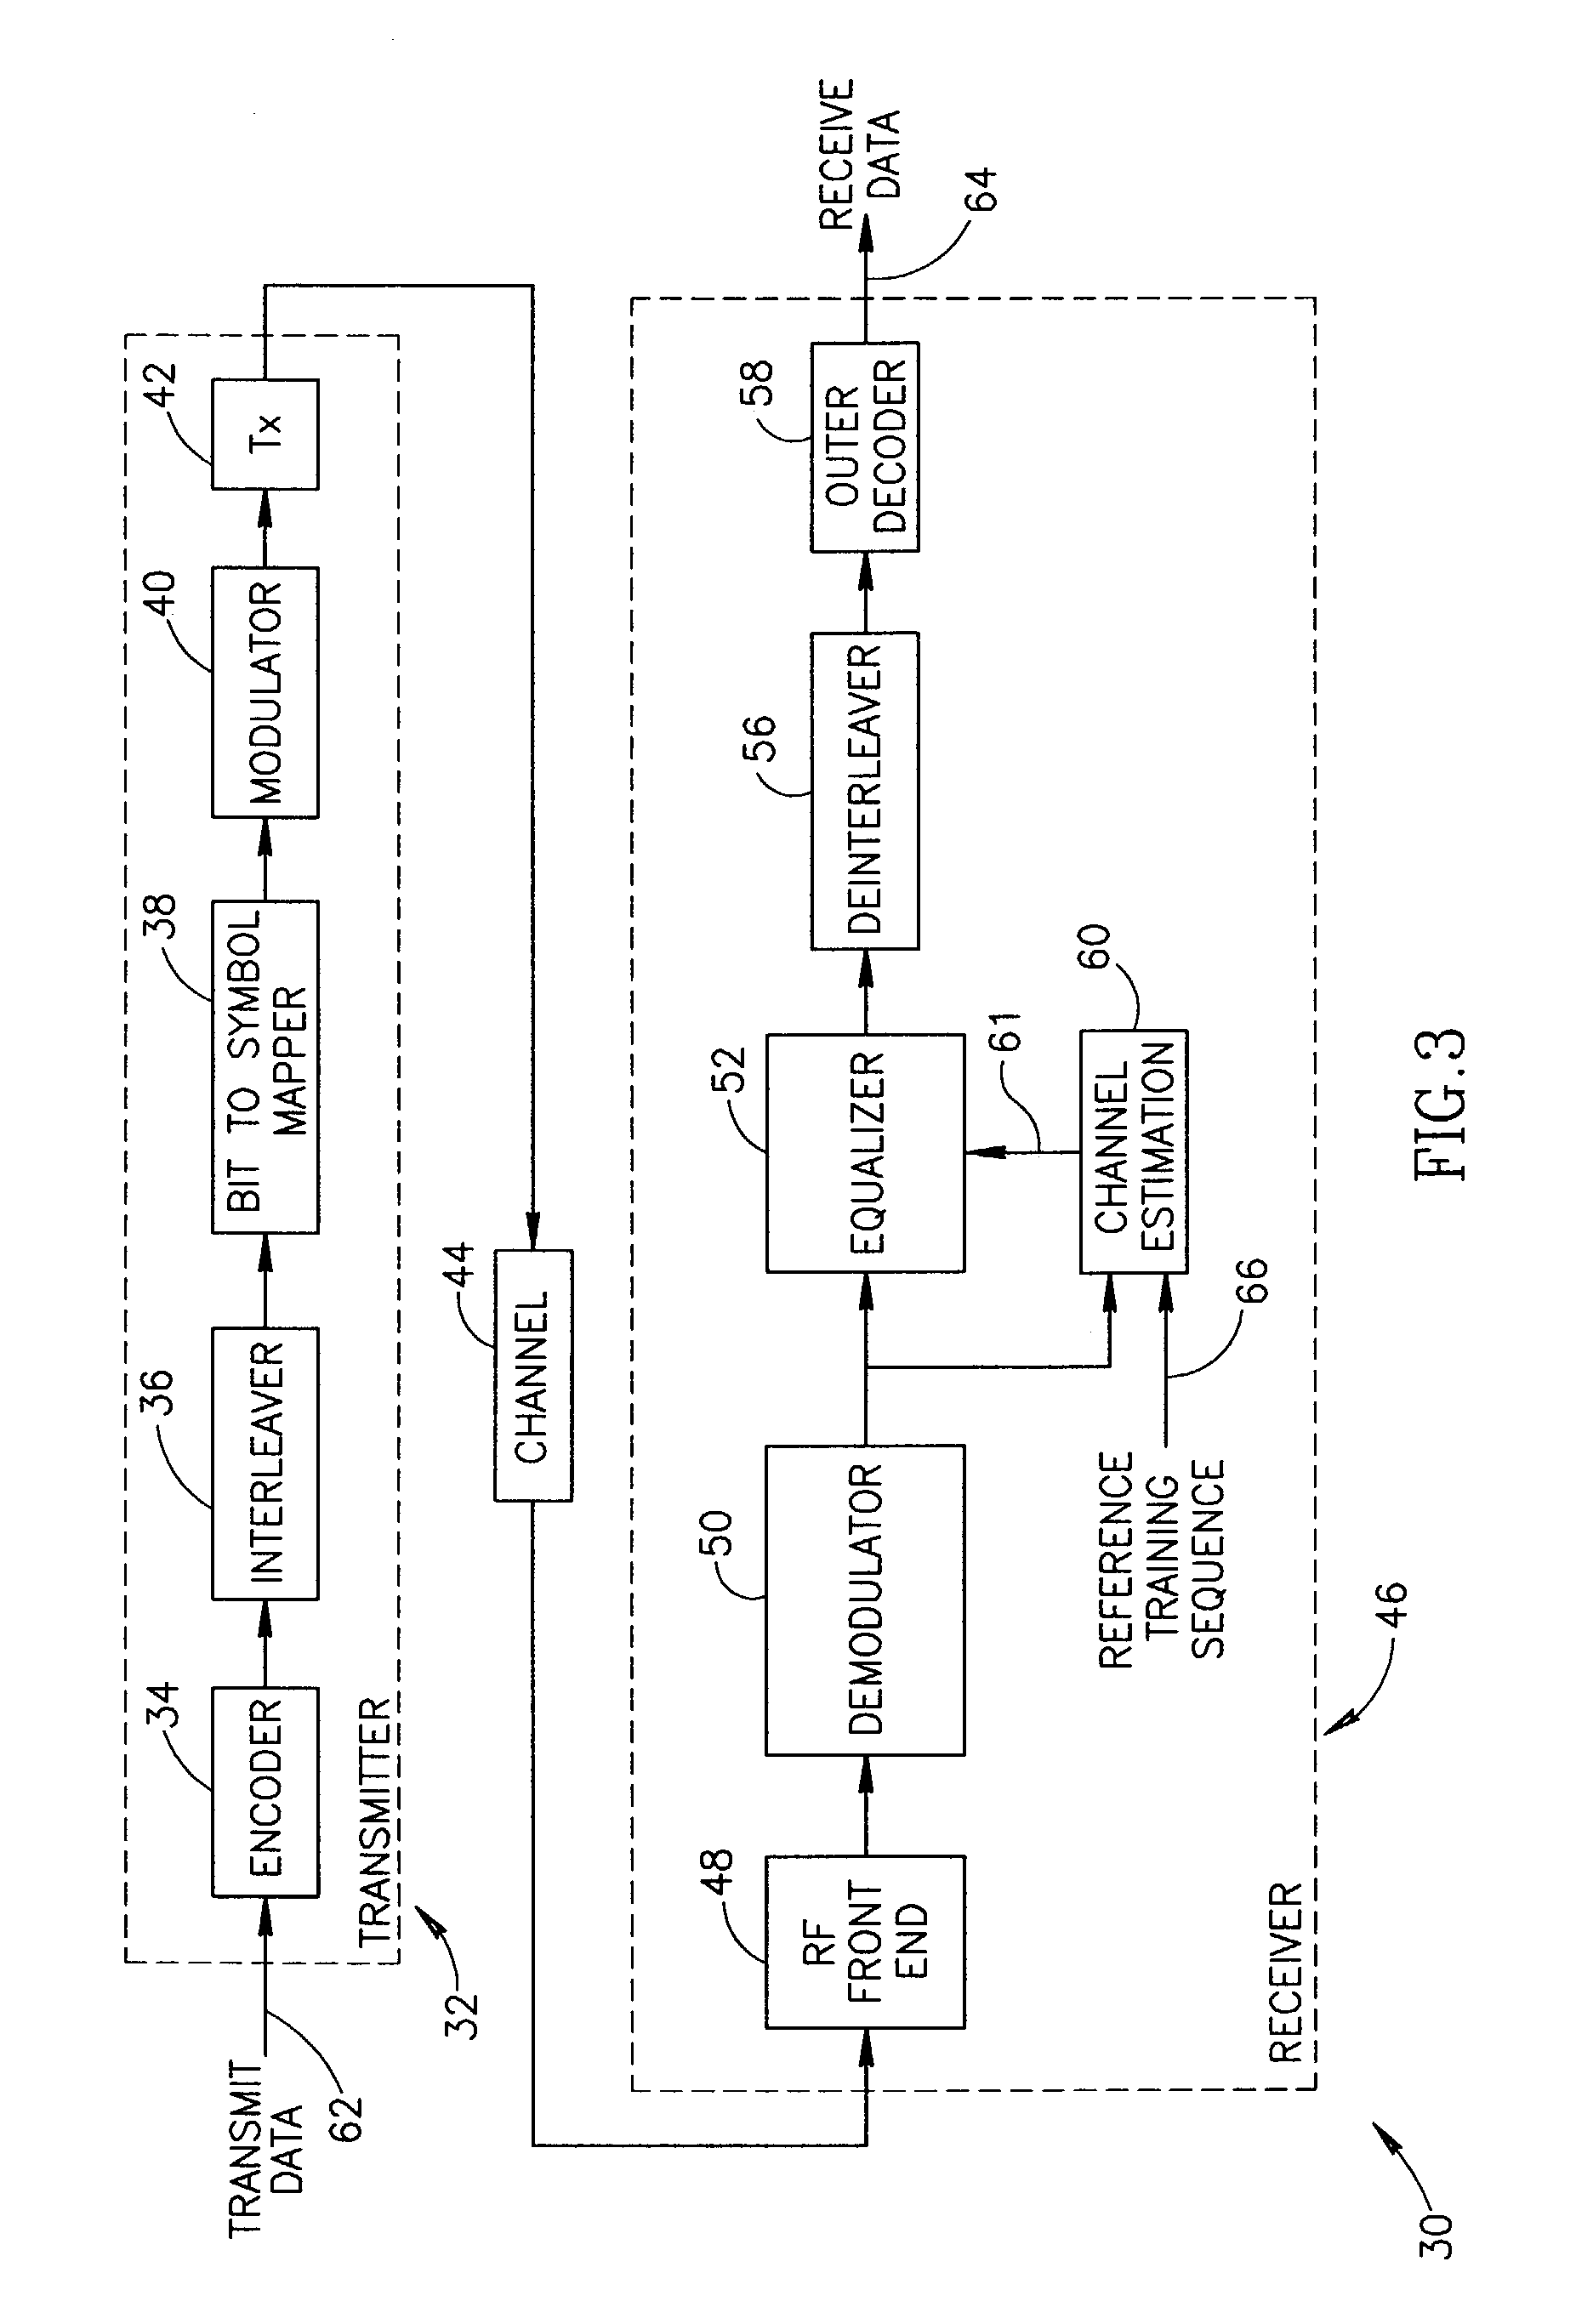 Channel order selection and channel estimation in wireless communication system